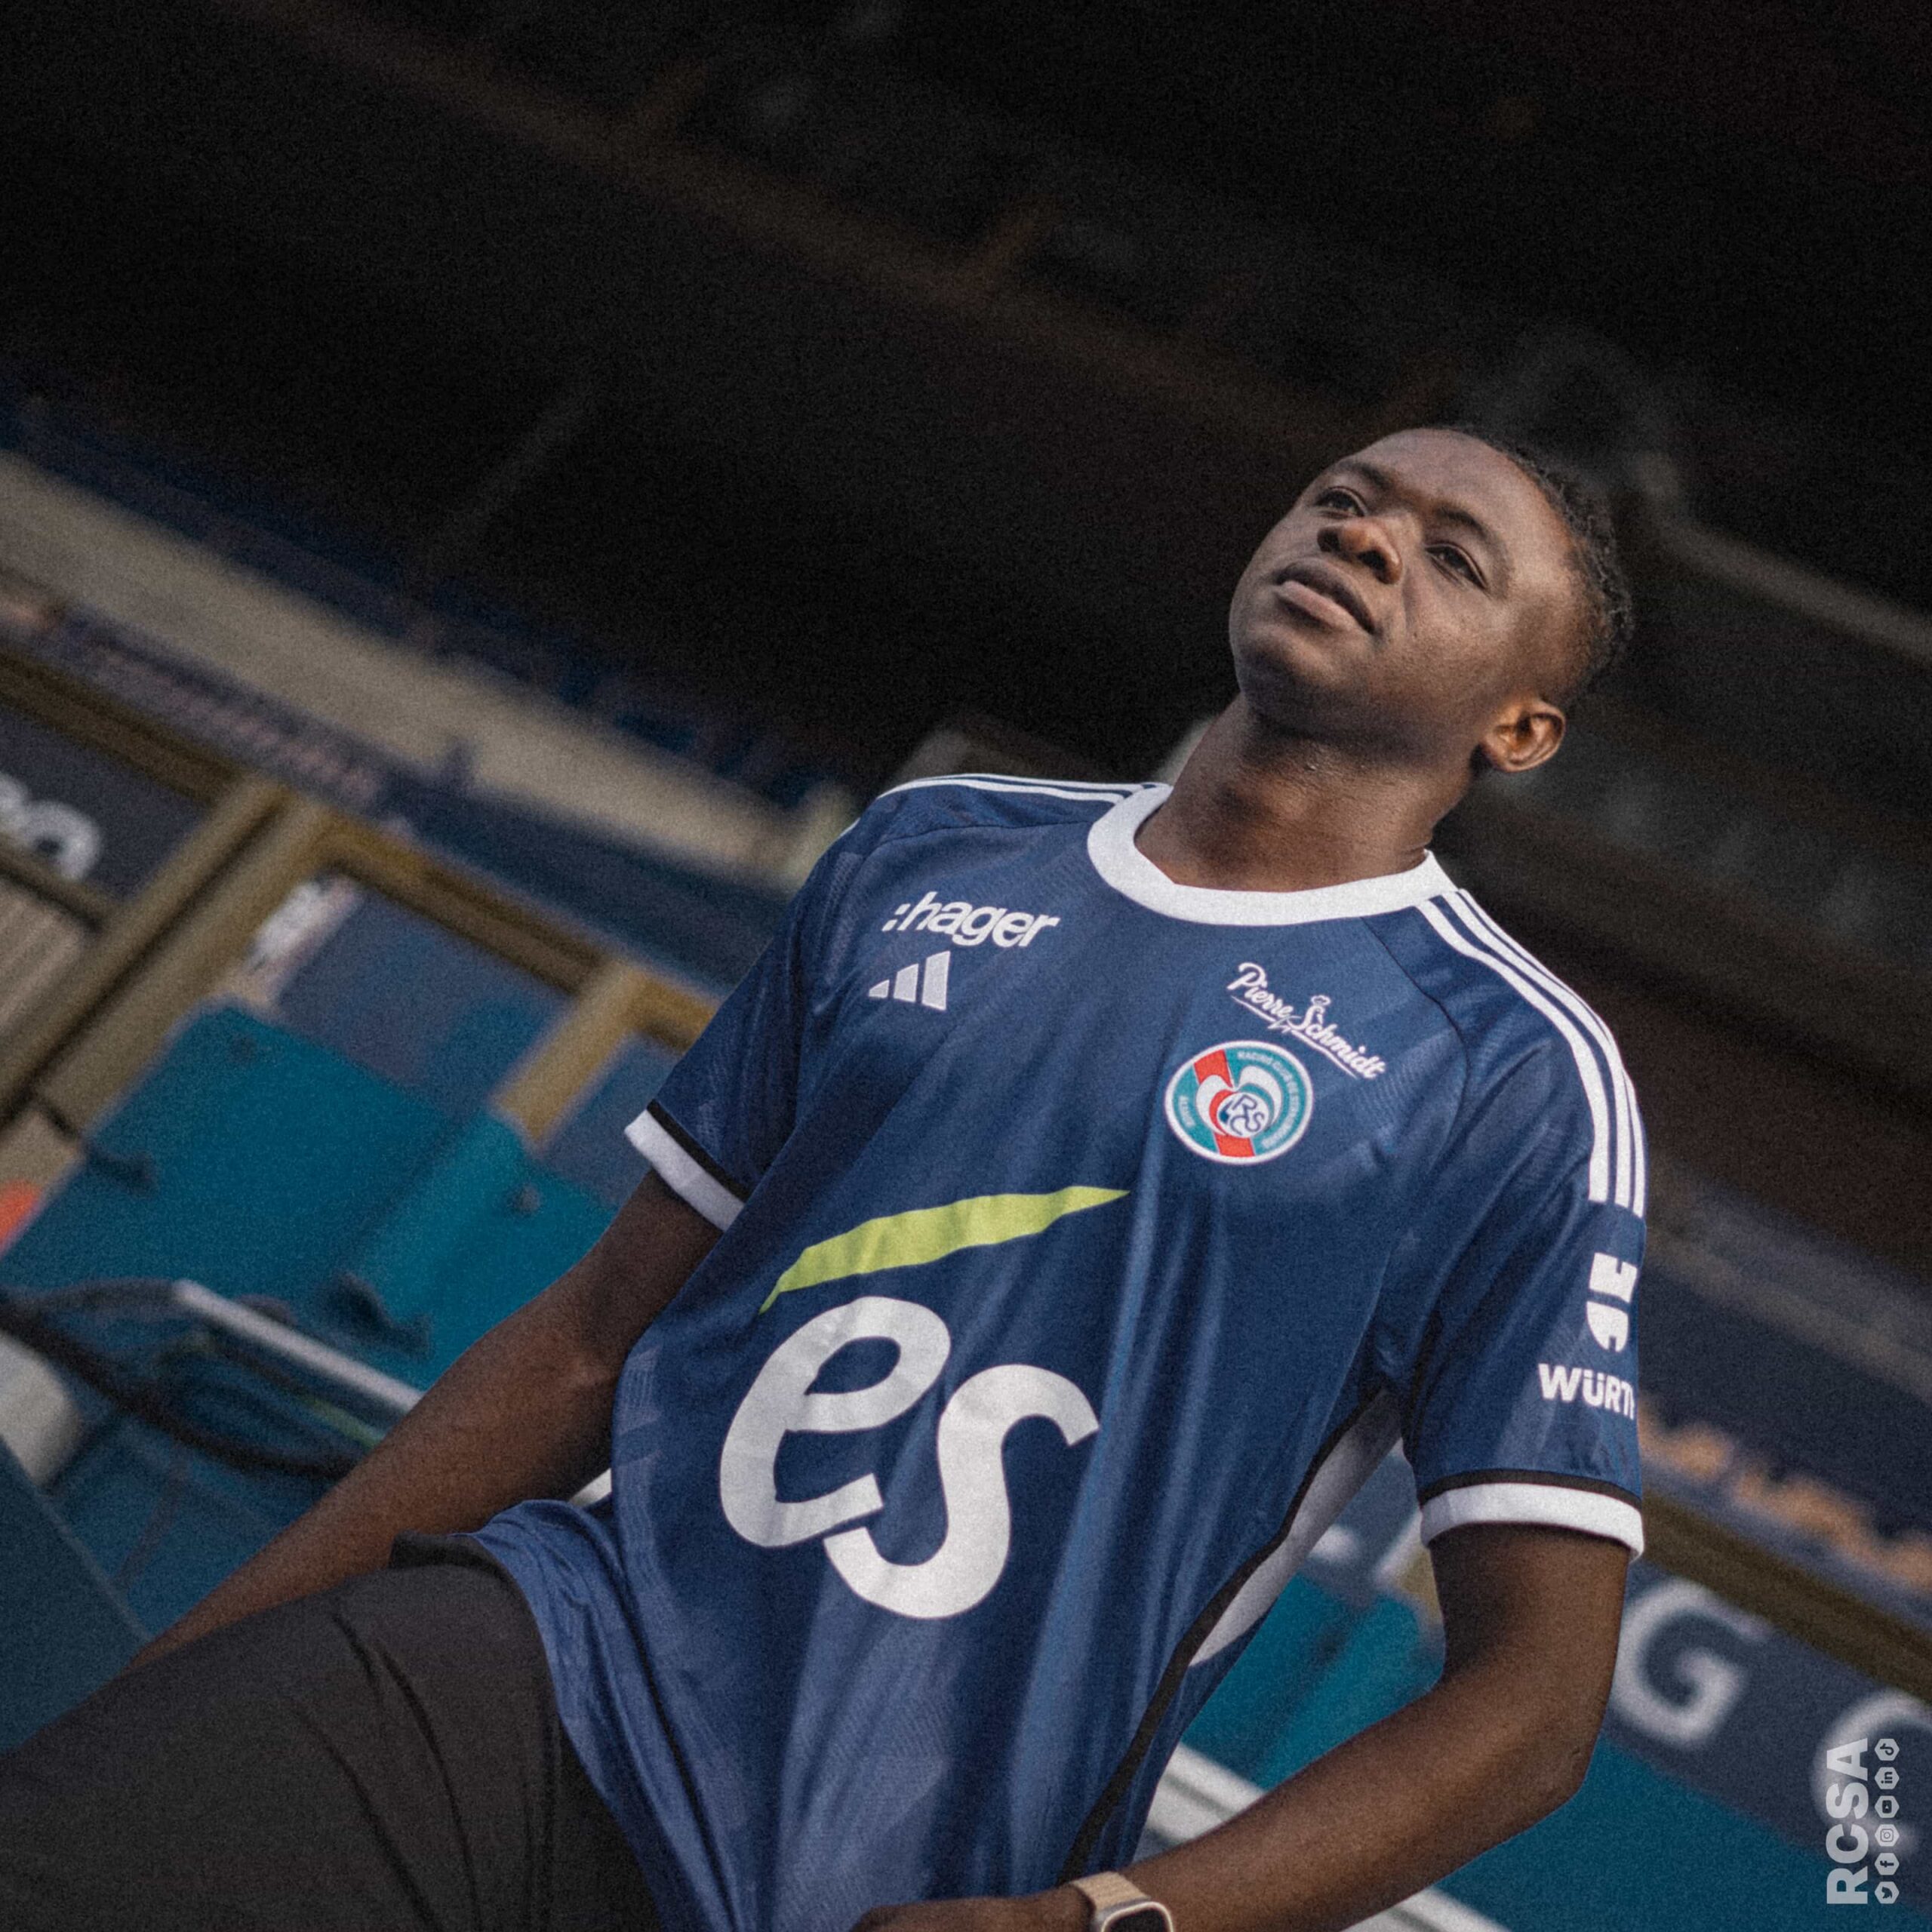 Racing Club de Strasbourg Alsace English on X: From 🇨🇮 to 🇫🇷  𝐖𝐞𝐥𝐜𝐨𝐦𝐞 𝐀𝐛𝐚𝐤𝐚𝐫 𝐒𝐲𝐥𝐥𝐚 — the Côte d'Ivoire international  has joined RCSA on a 5️⃣ year contract until 2028! 🐘 #MercatoRCSA